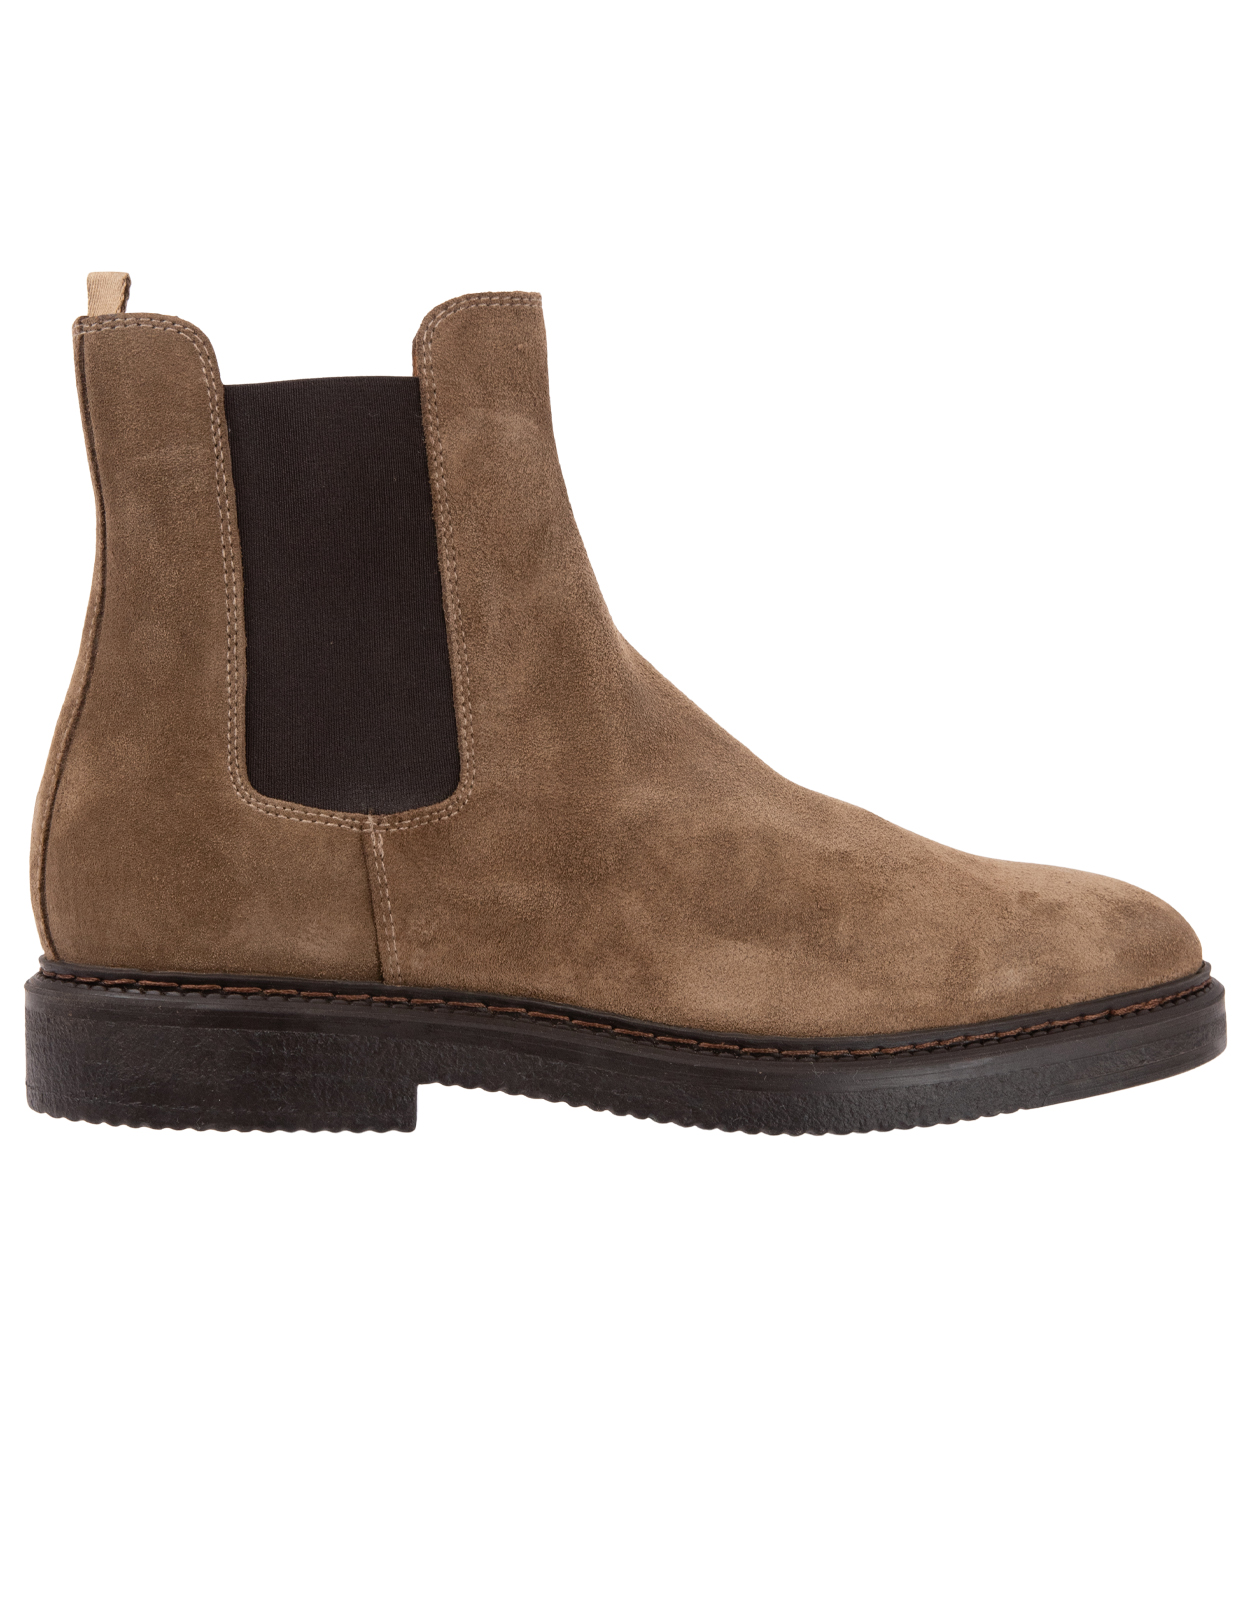 Chelsea Boots Tabacco Stl 40